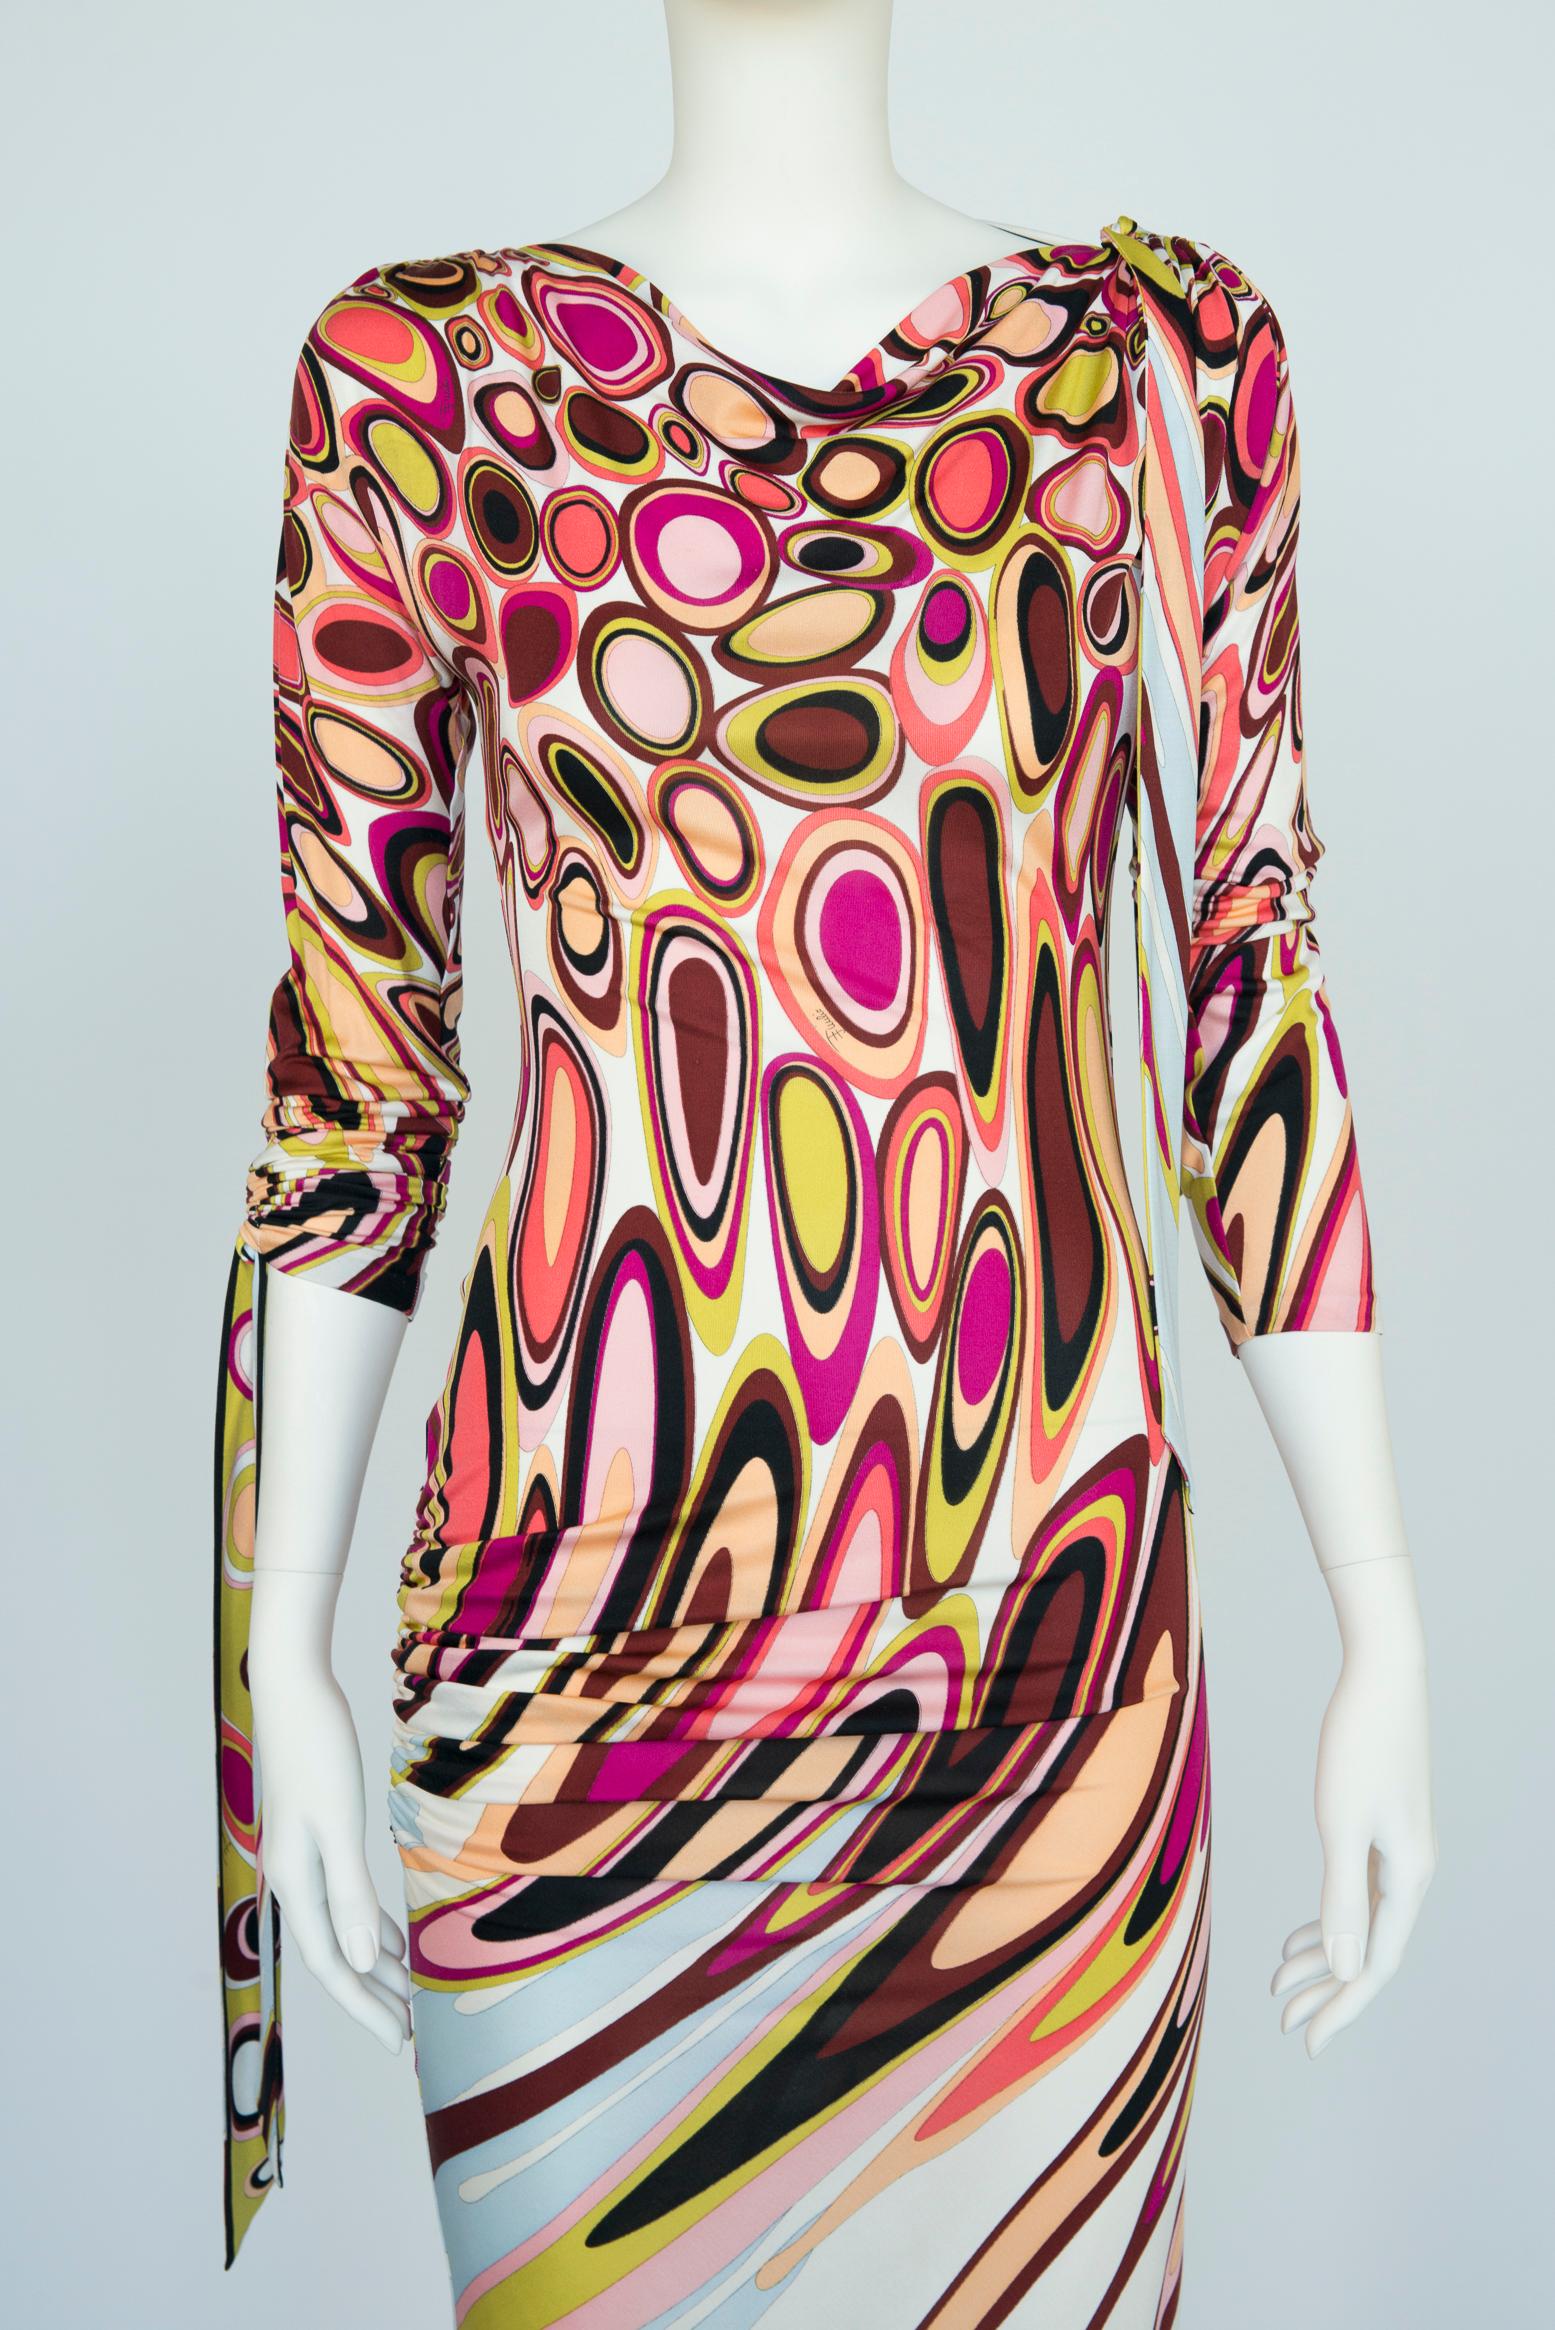 Since the beginning of the 50's until today, the Italian - Florentine based - label has celebrated color, movement and bold, exuberant prints. From the 2003 Fall-Winter collection when Christian Lacroix was its artistic director, this dress is cut